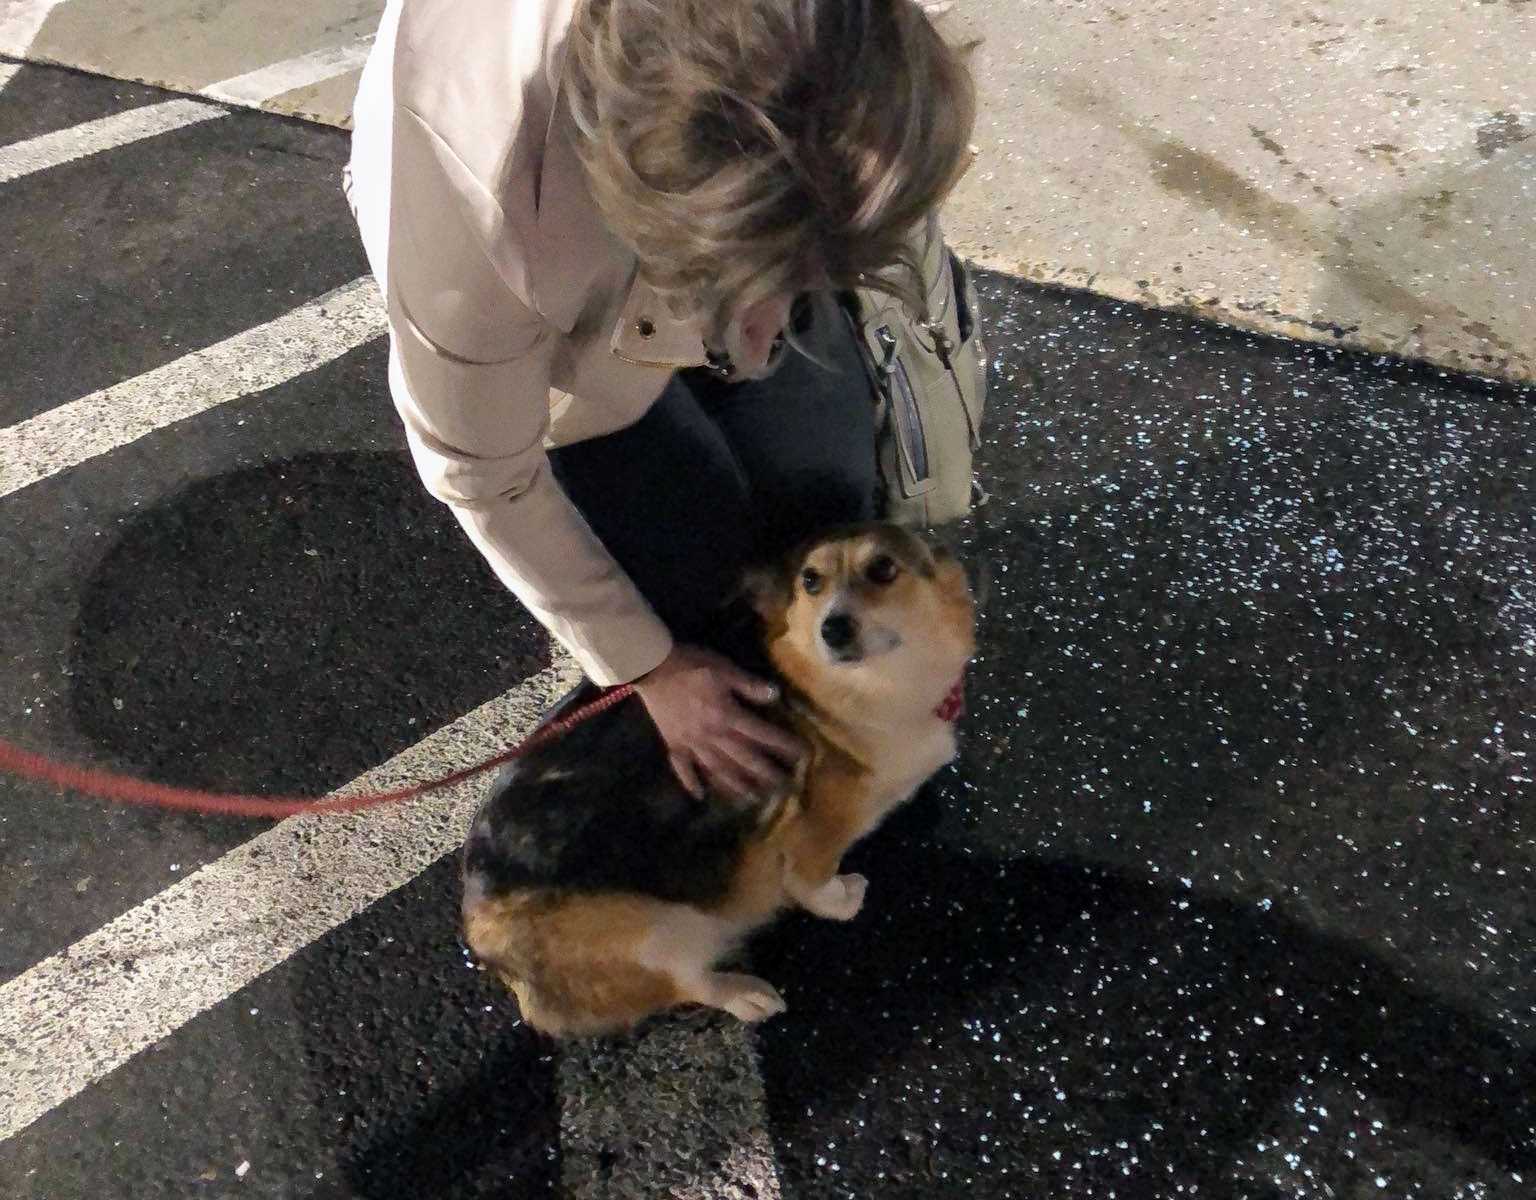 woman crouching down to pet dog in parking lot with a red leash